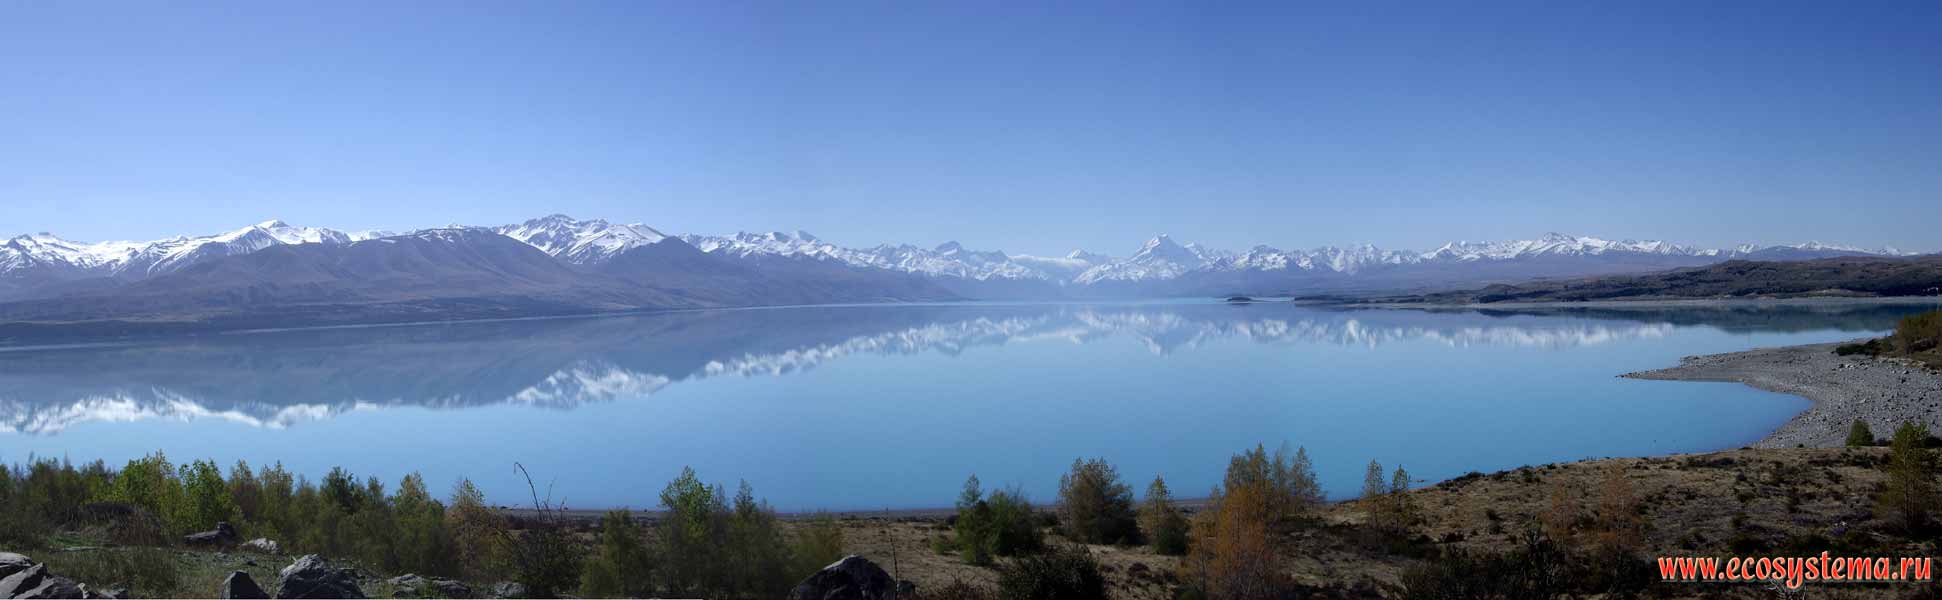 Panorama of the Lake Pukaki - the typical mountain (alpine) oligotrophic
(with low nutrient level) glacial lake. 480 meters above sea level.
Southern (New Zealand) Alps. Mount Cook (the highest peak in New Zealand)
is far away in the middle (3764 m height). Canterbury region, South Island, New Zealand